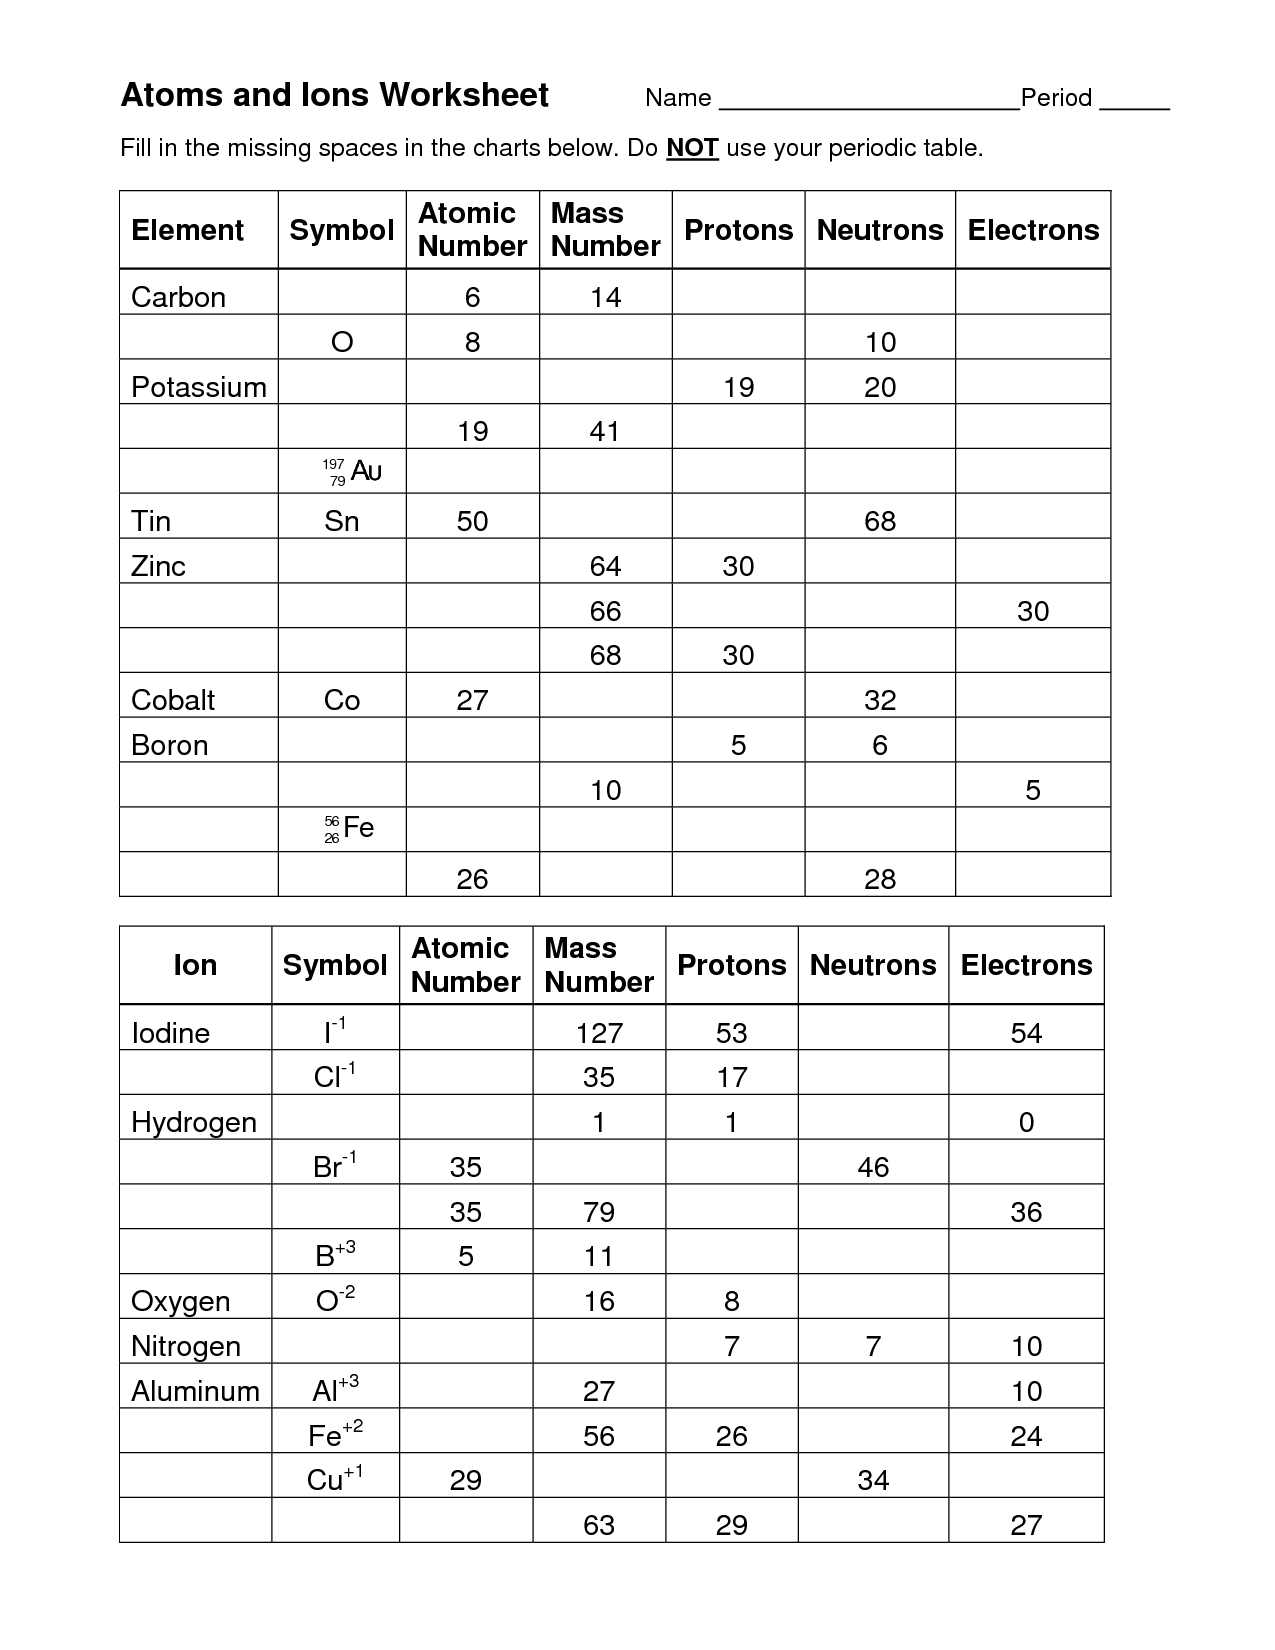 11-best-images-of-atom-worksheets-with-answer-keys-atoms-ions-and-isotopes-worksheet-answer